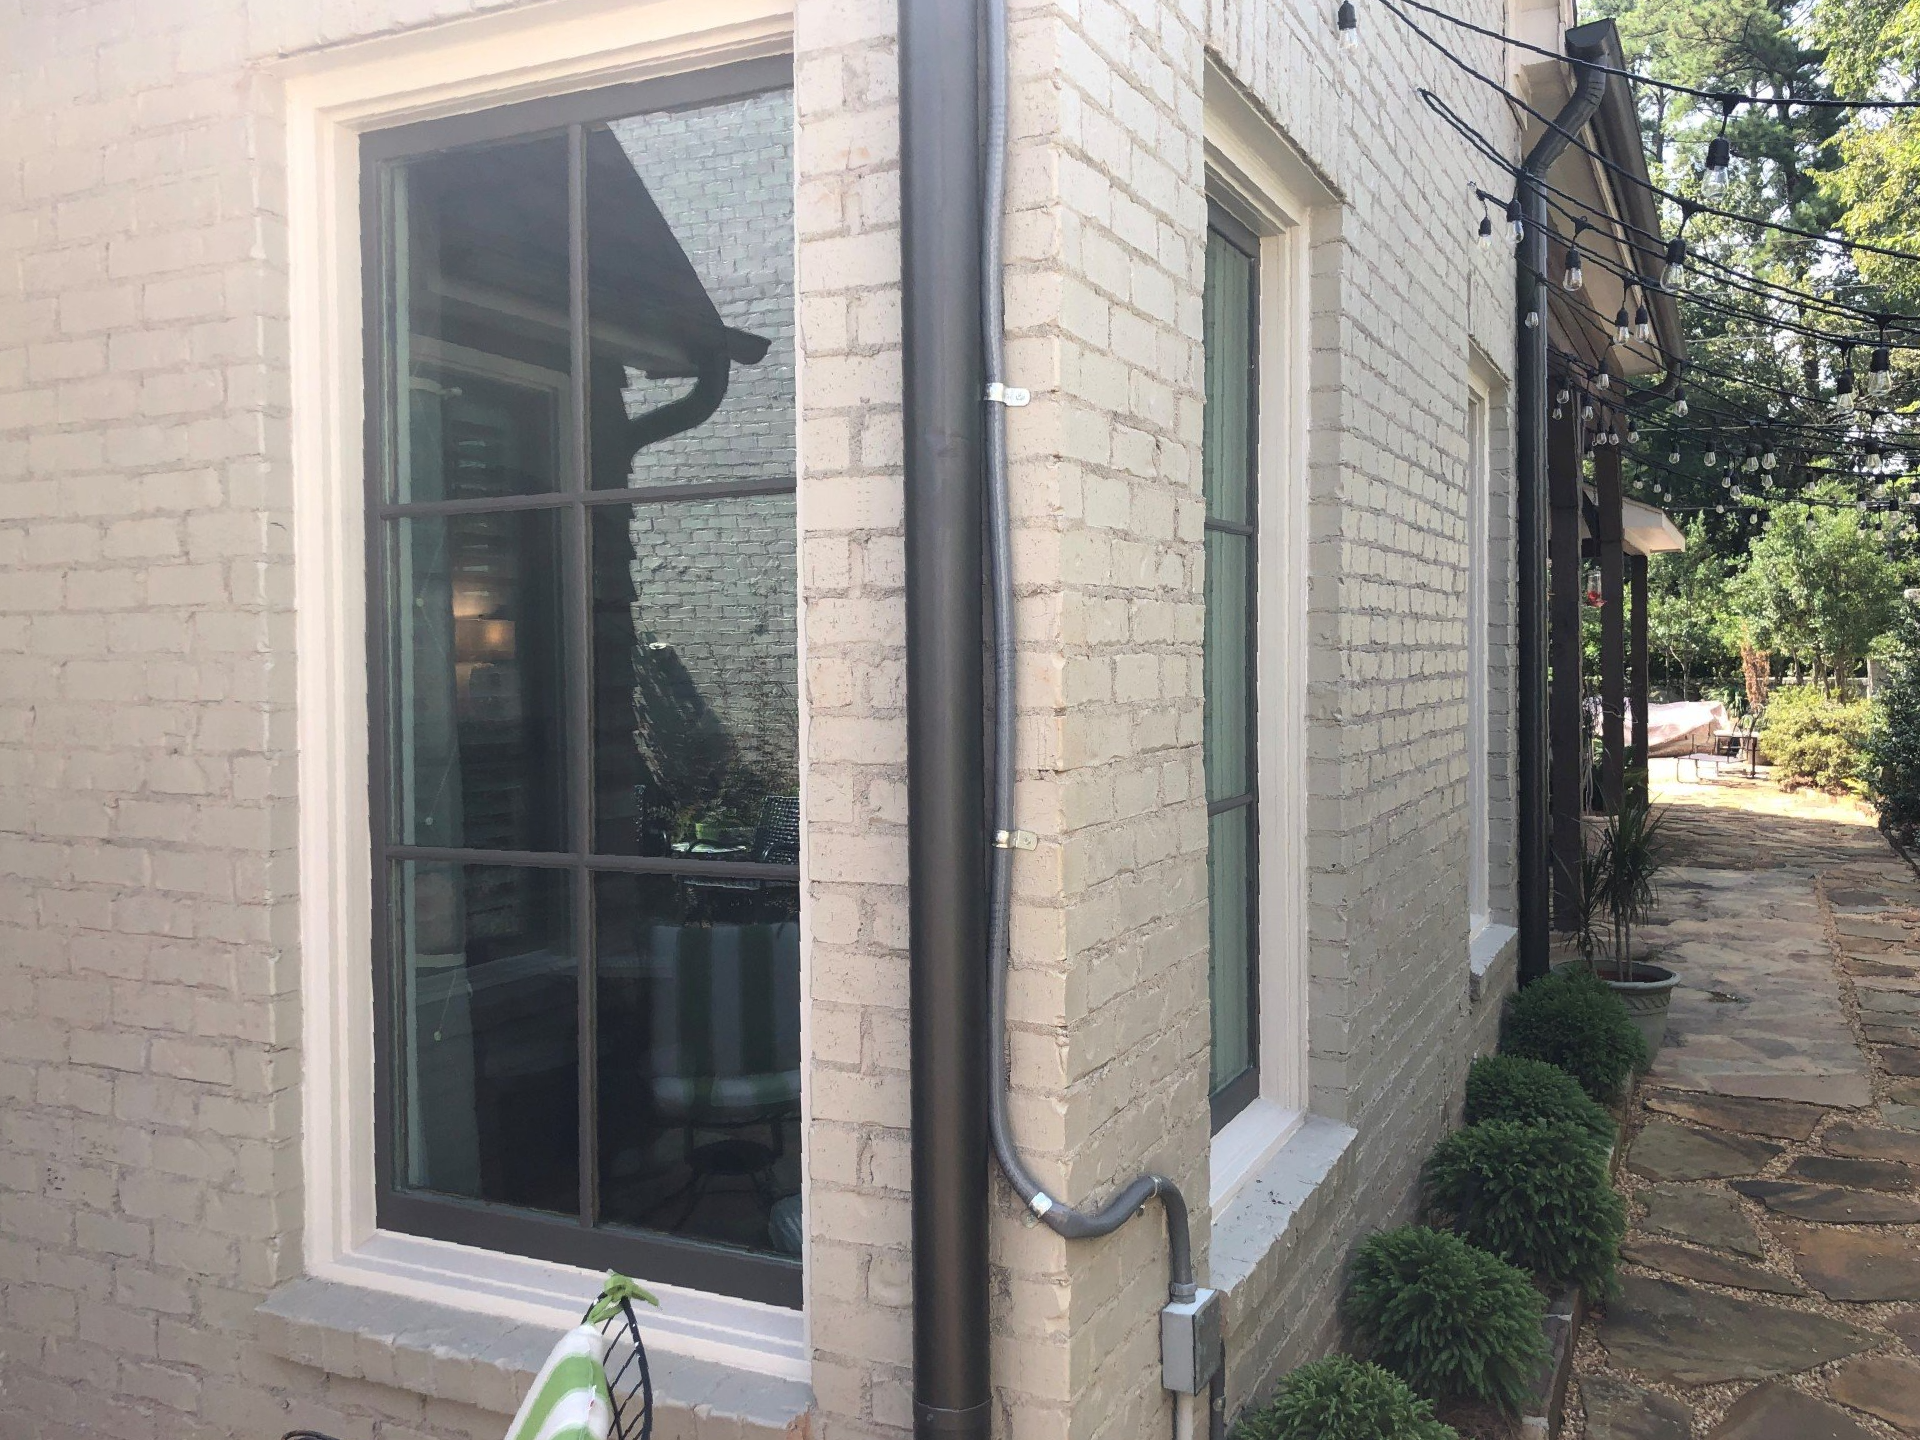 Residential tint Birmingham AL - The heat coming in this Birmingham home was causing disruptions with temperature gaps from room to room until SPF Tint blocked heat gain from entering windows in Birmingham AL